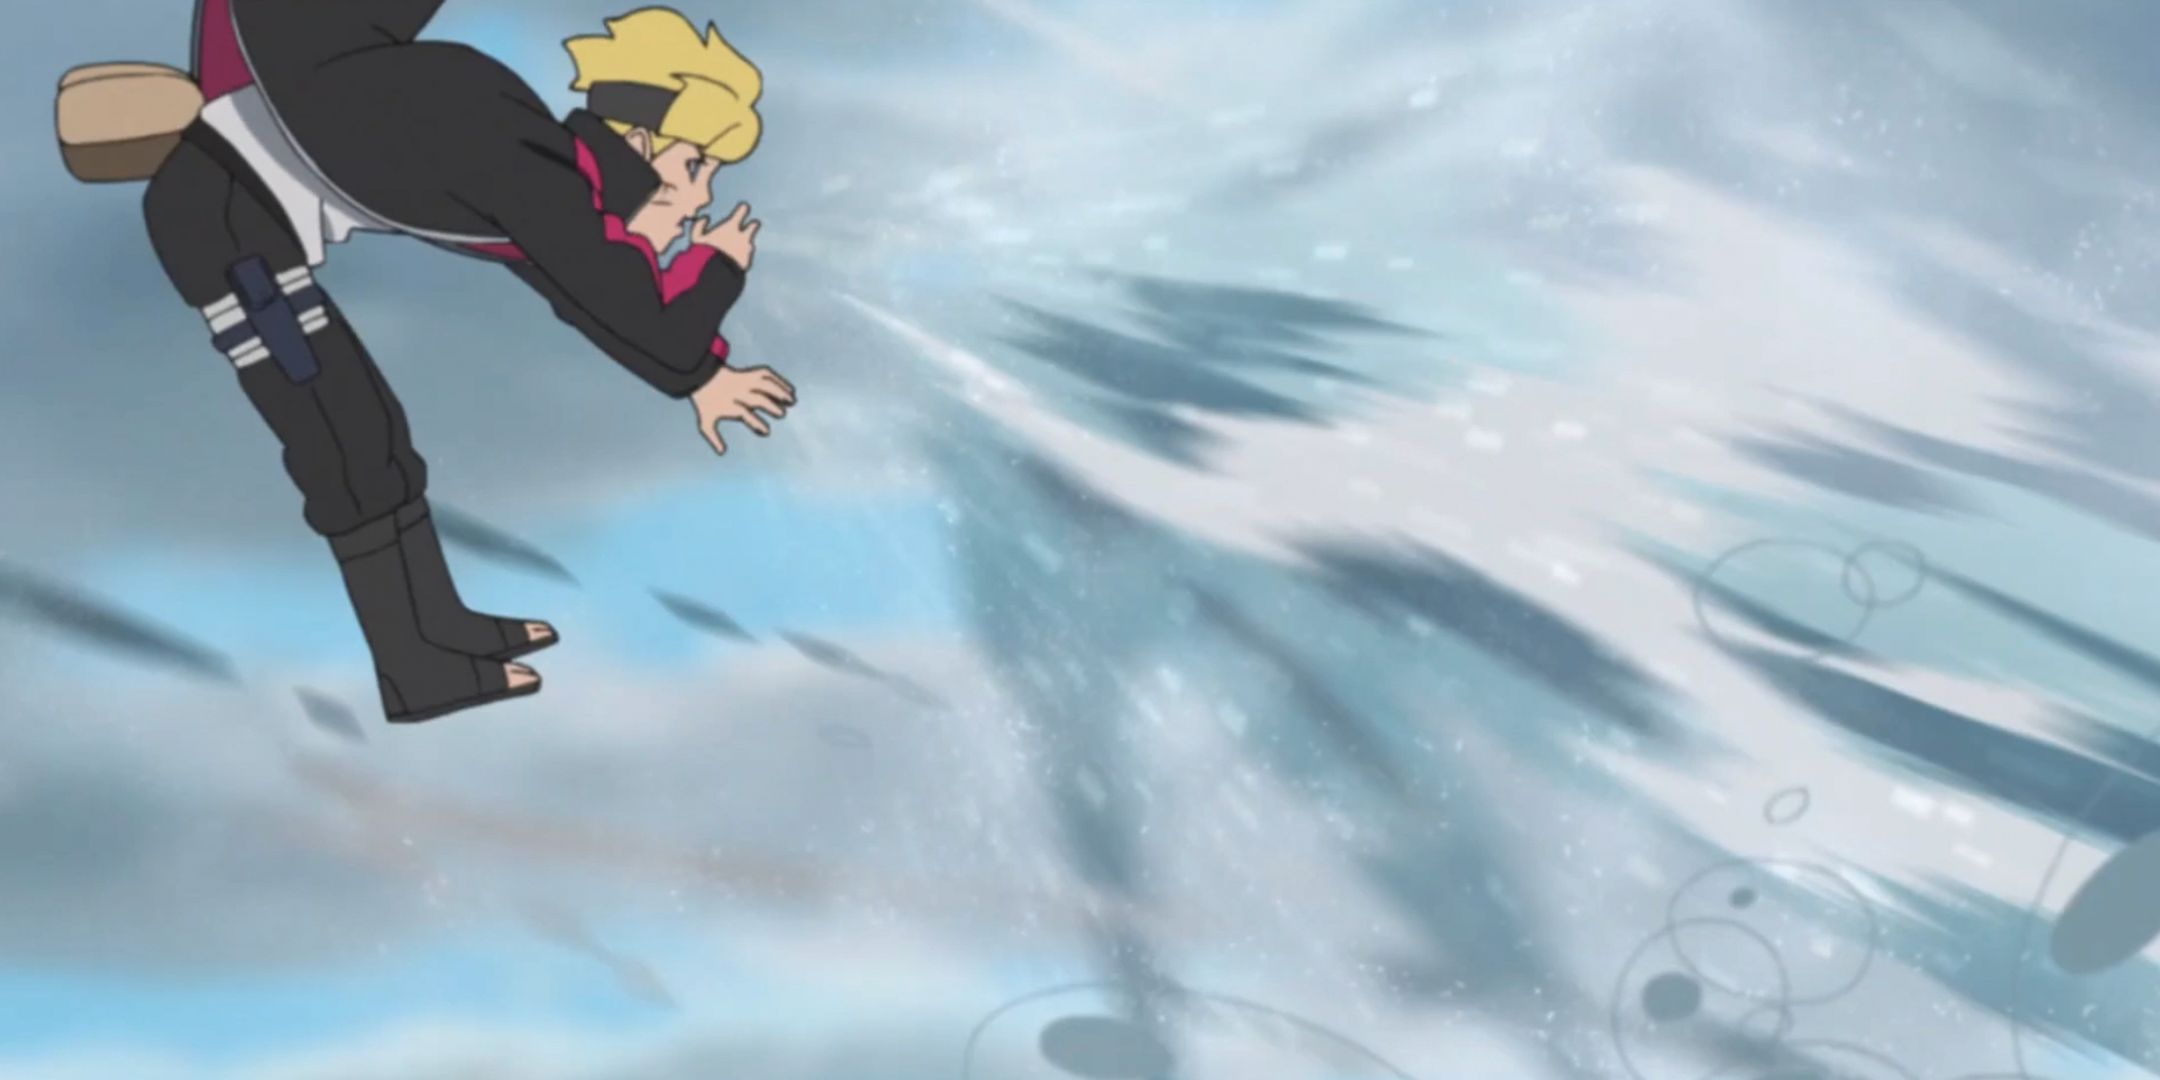 Boruto uses Water Release Surging Sea to release a wave of water from his mouth in the anime